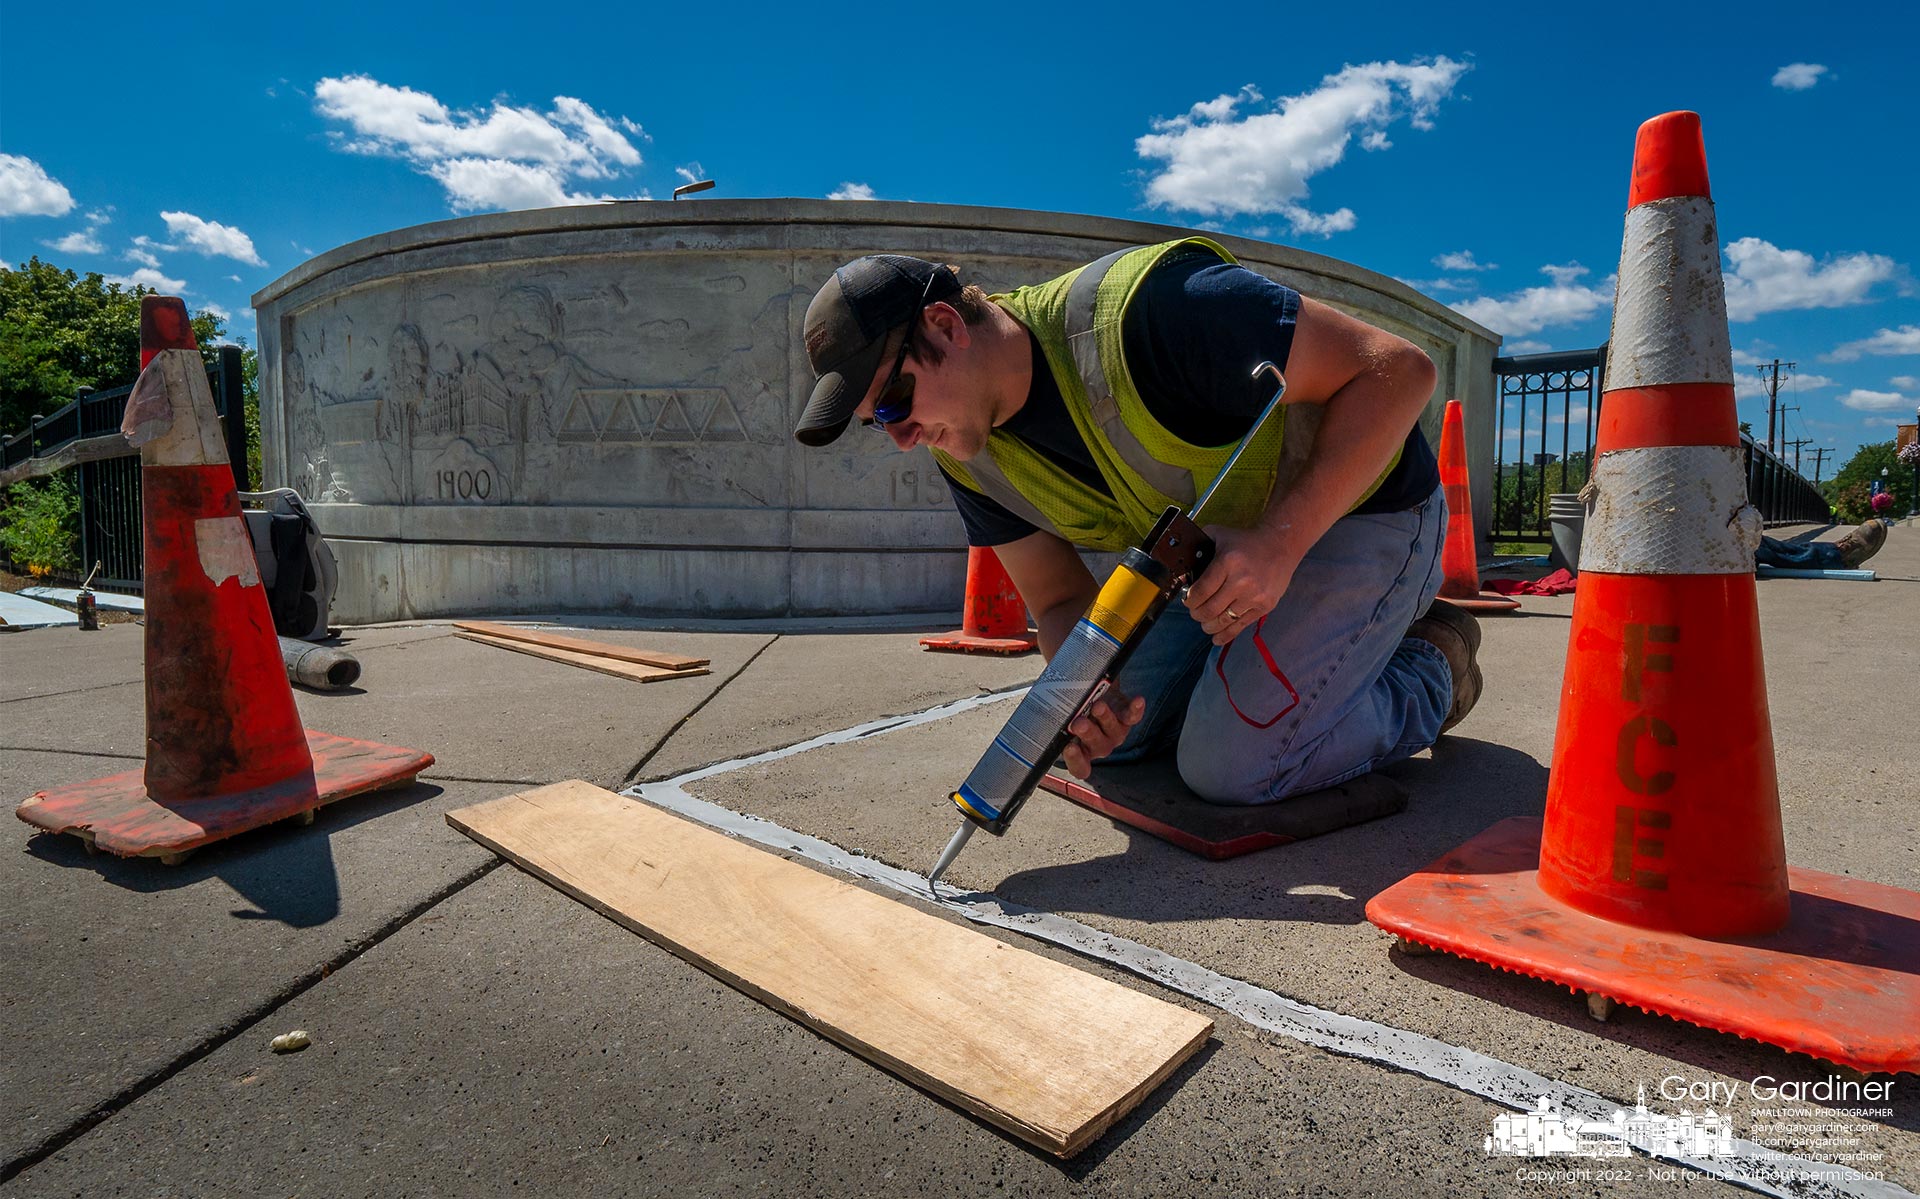 A Franklin County Engineer worker spreads self-leveling caulk into expansion points at the Main Street bridge resealing the expansion joints. My Final Photo for August 31, 2022.